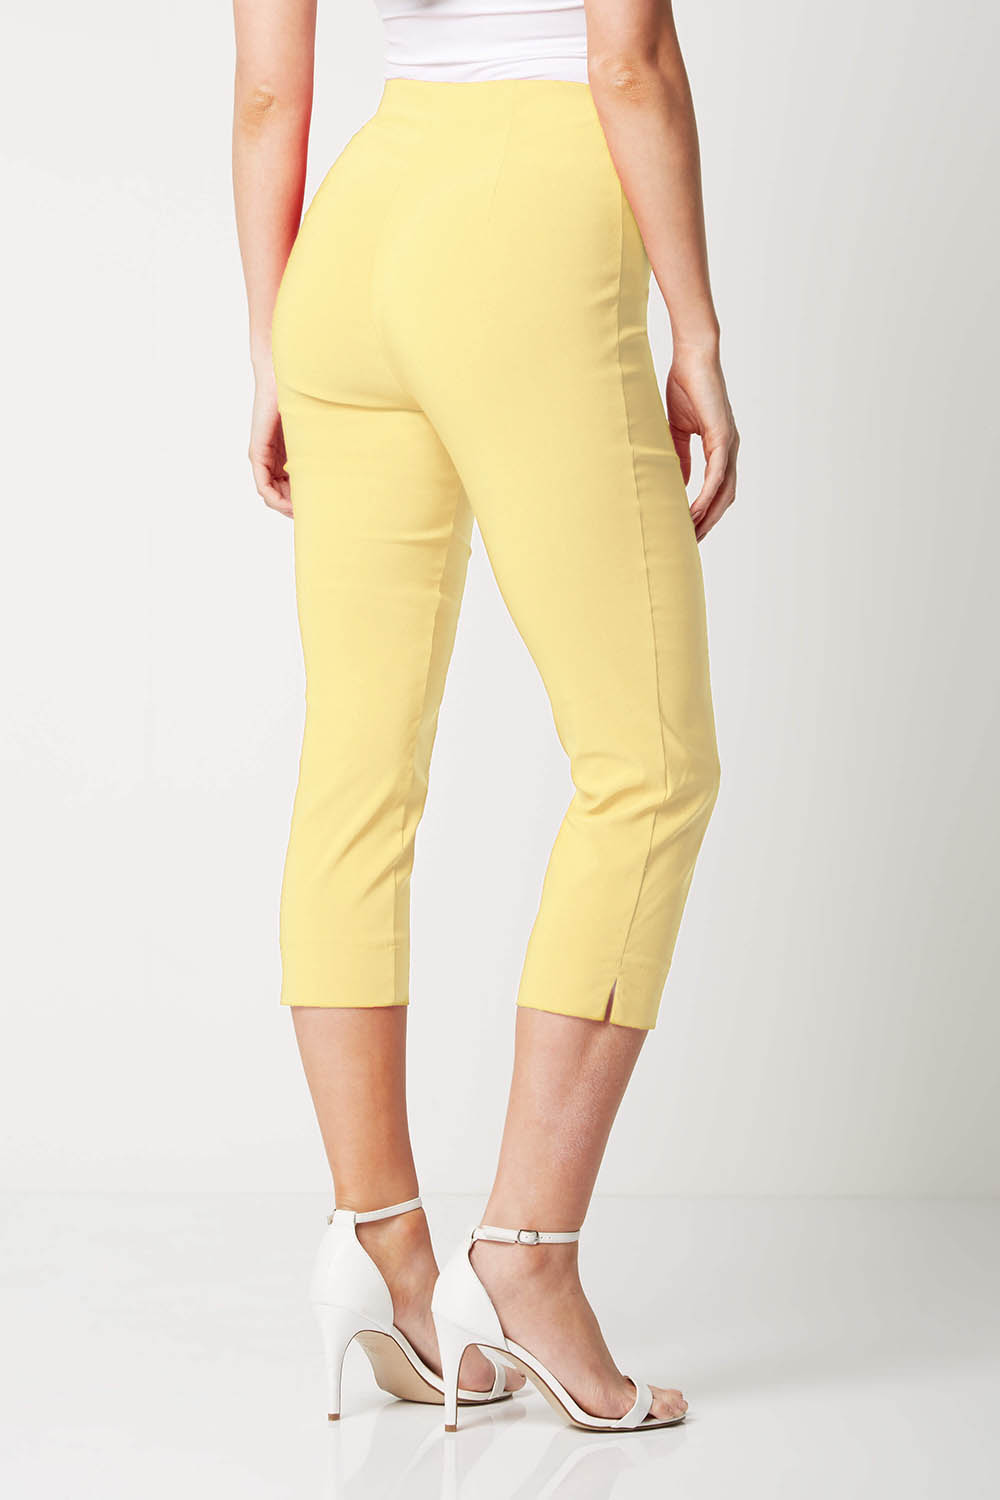 Lemon  Cropped Stretch Trouser, Image 3 of 4